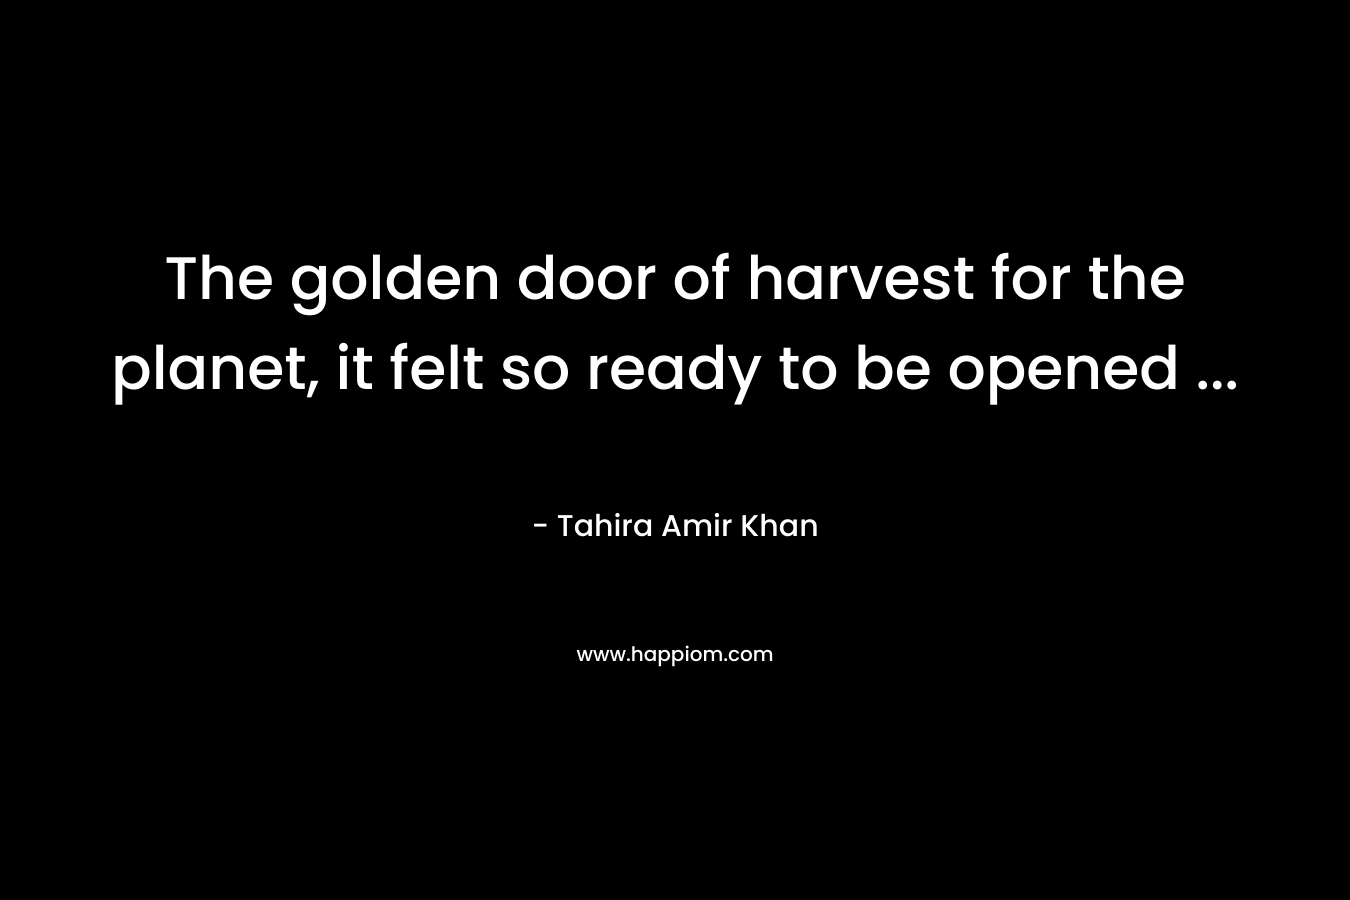 The golden door of harvest for the planet, it felt so ready to be opened ...